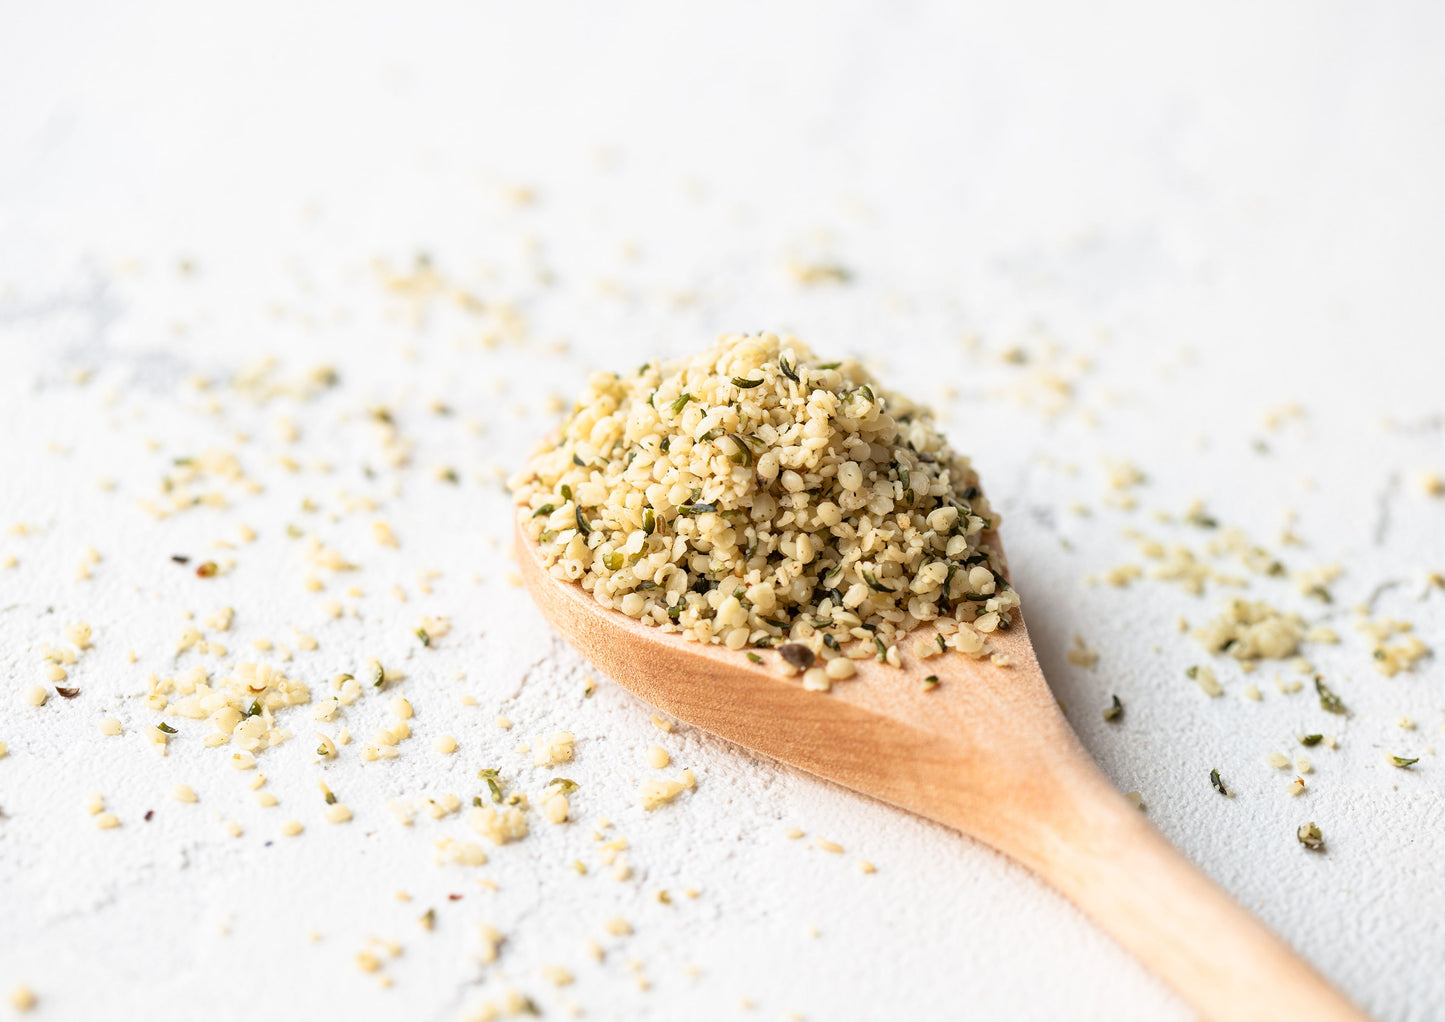 Organic Paraguayan Hemp Seeds – Non-GMO Raw Hearts, Hulled, Kosher, Vegan, Bulk. Keto-Friendly. Rich in Omega 3 & 6. Good Source of Protein. Great for Smoothies, Oatmeal, and Salads